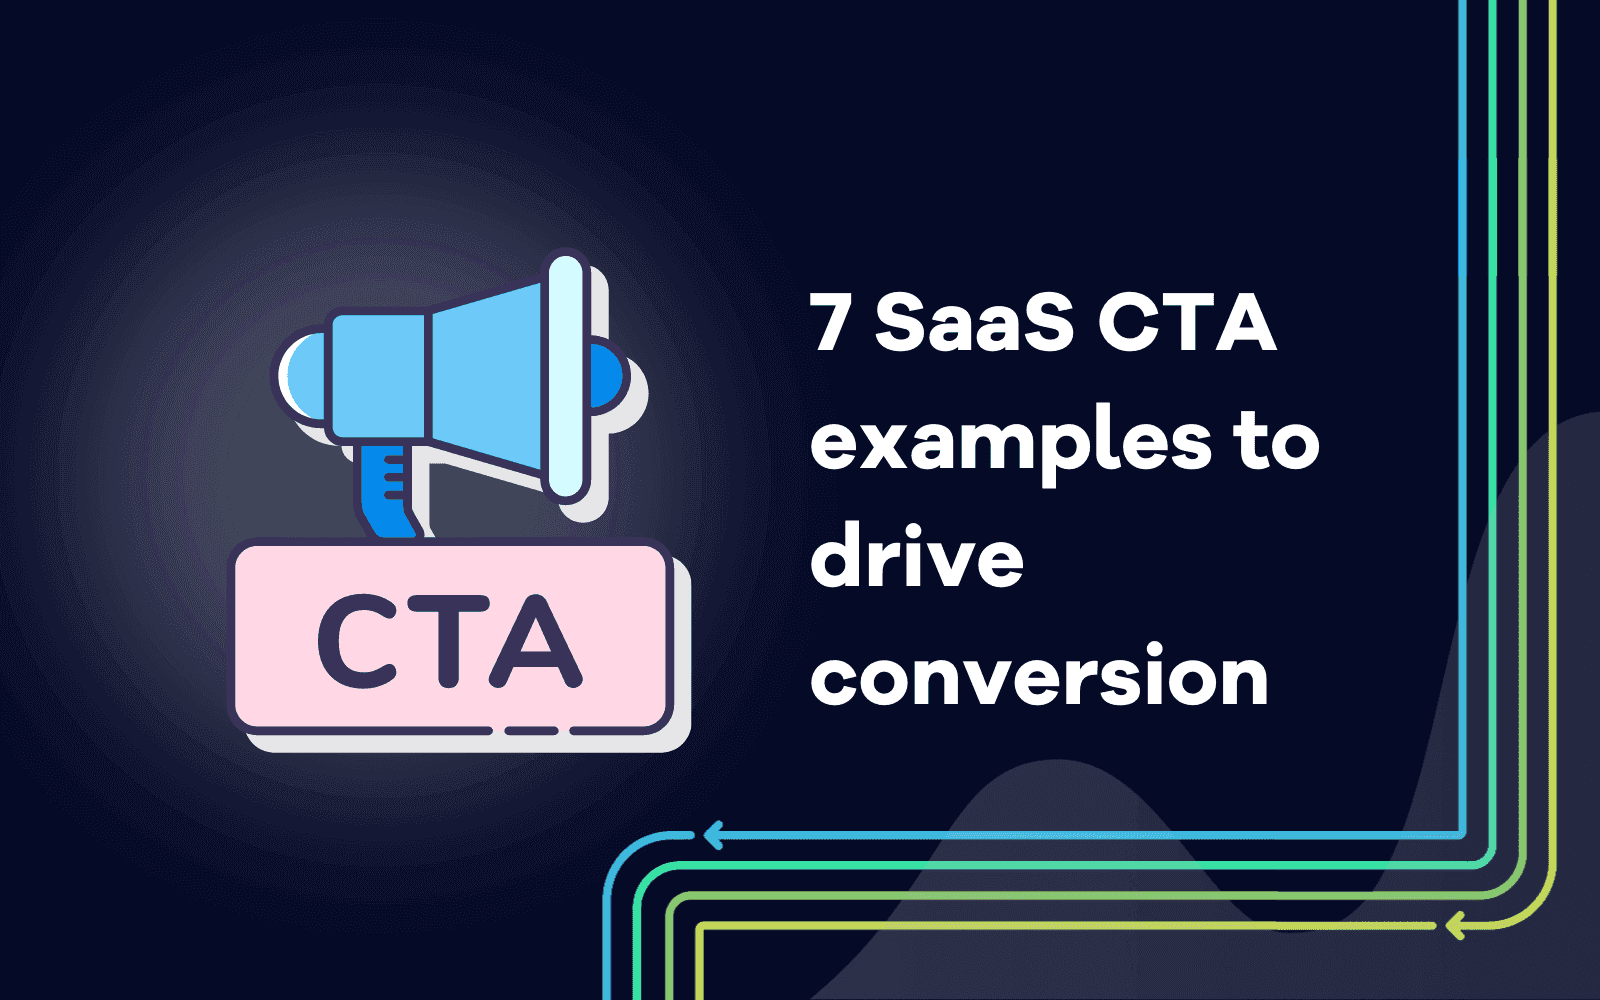 SaaS CTA examples to drive conversion